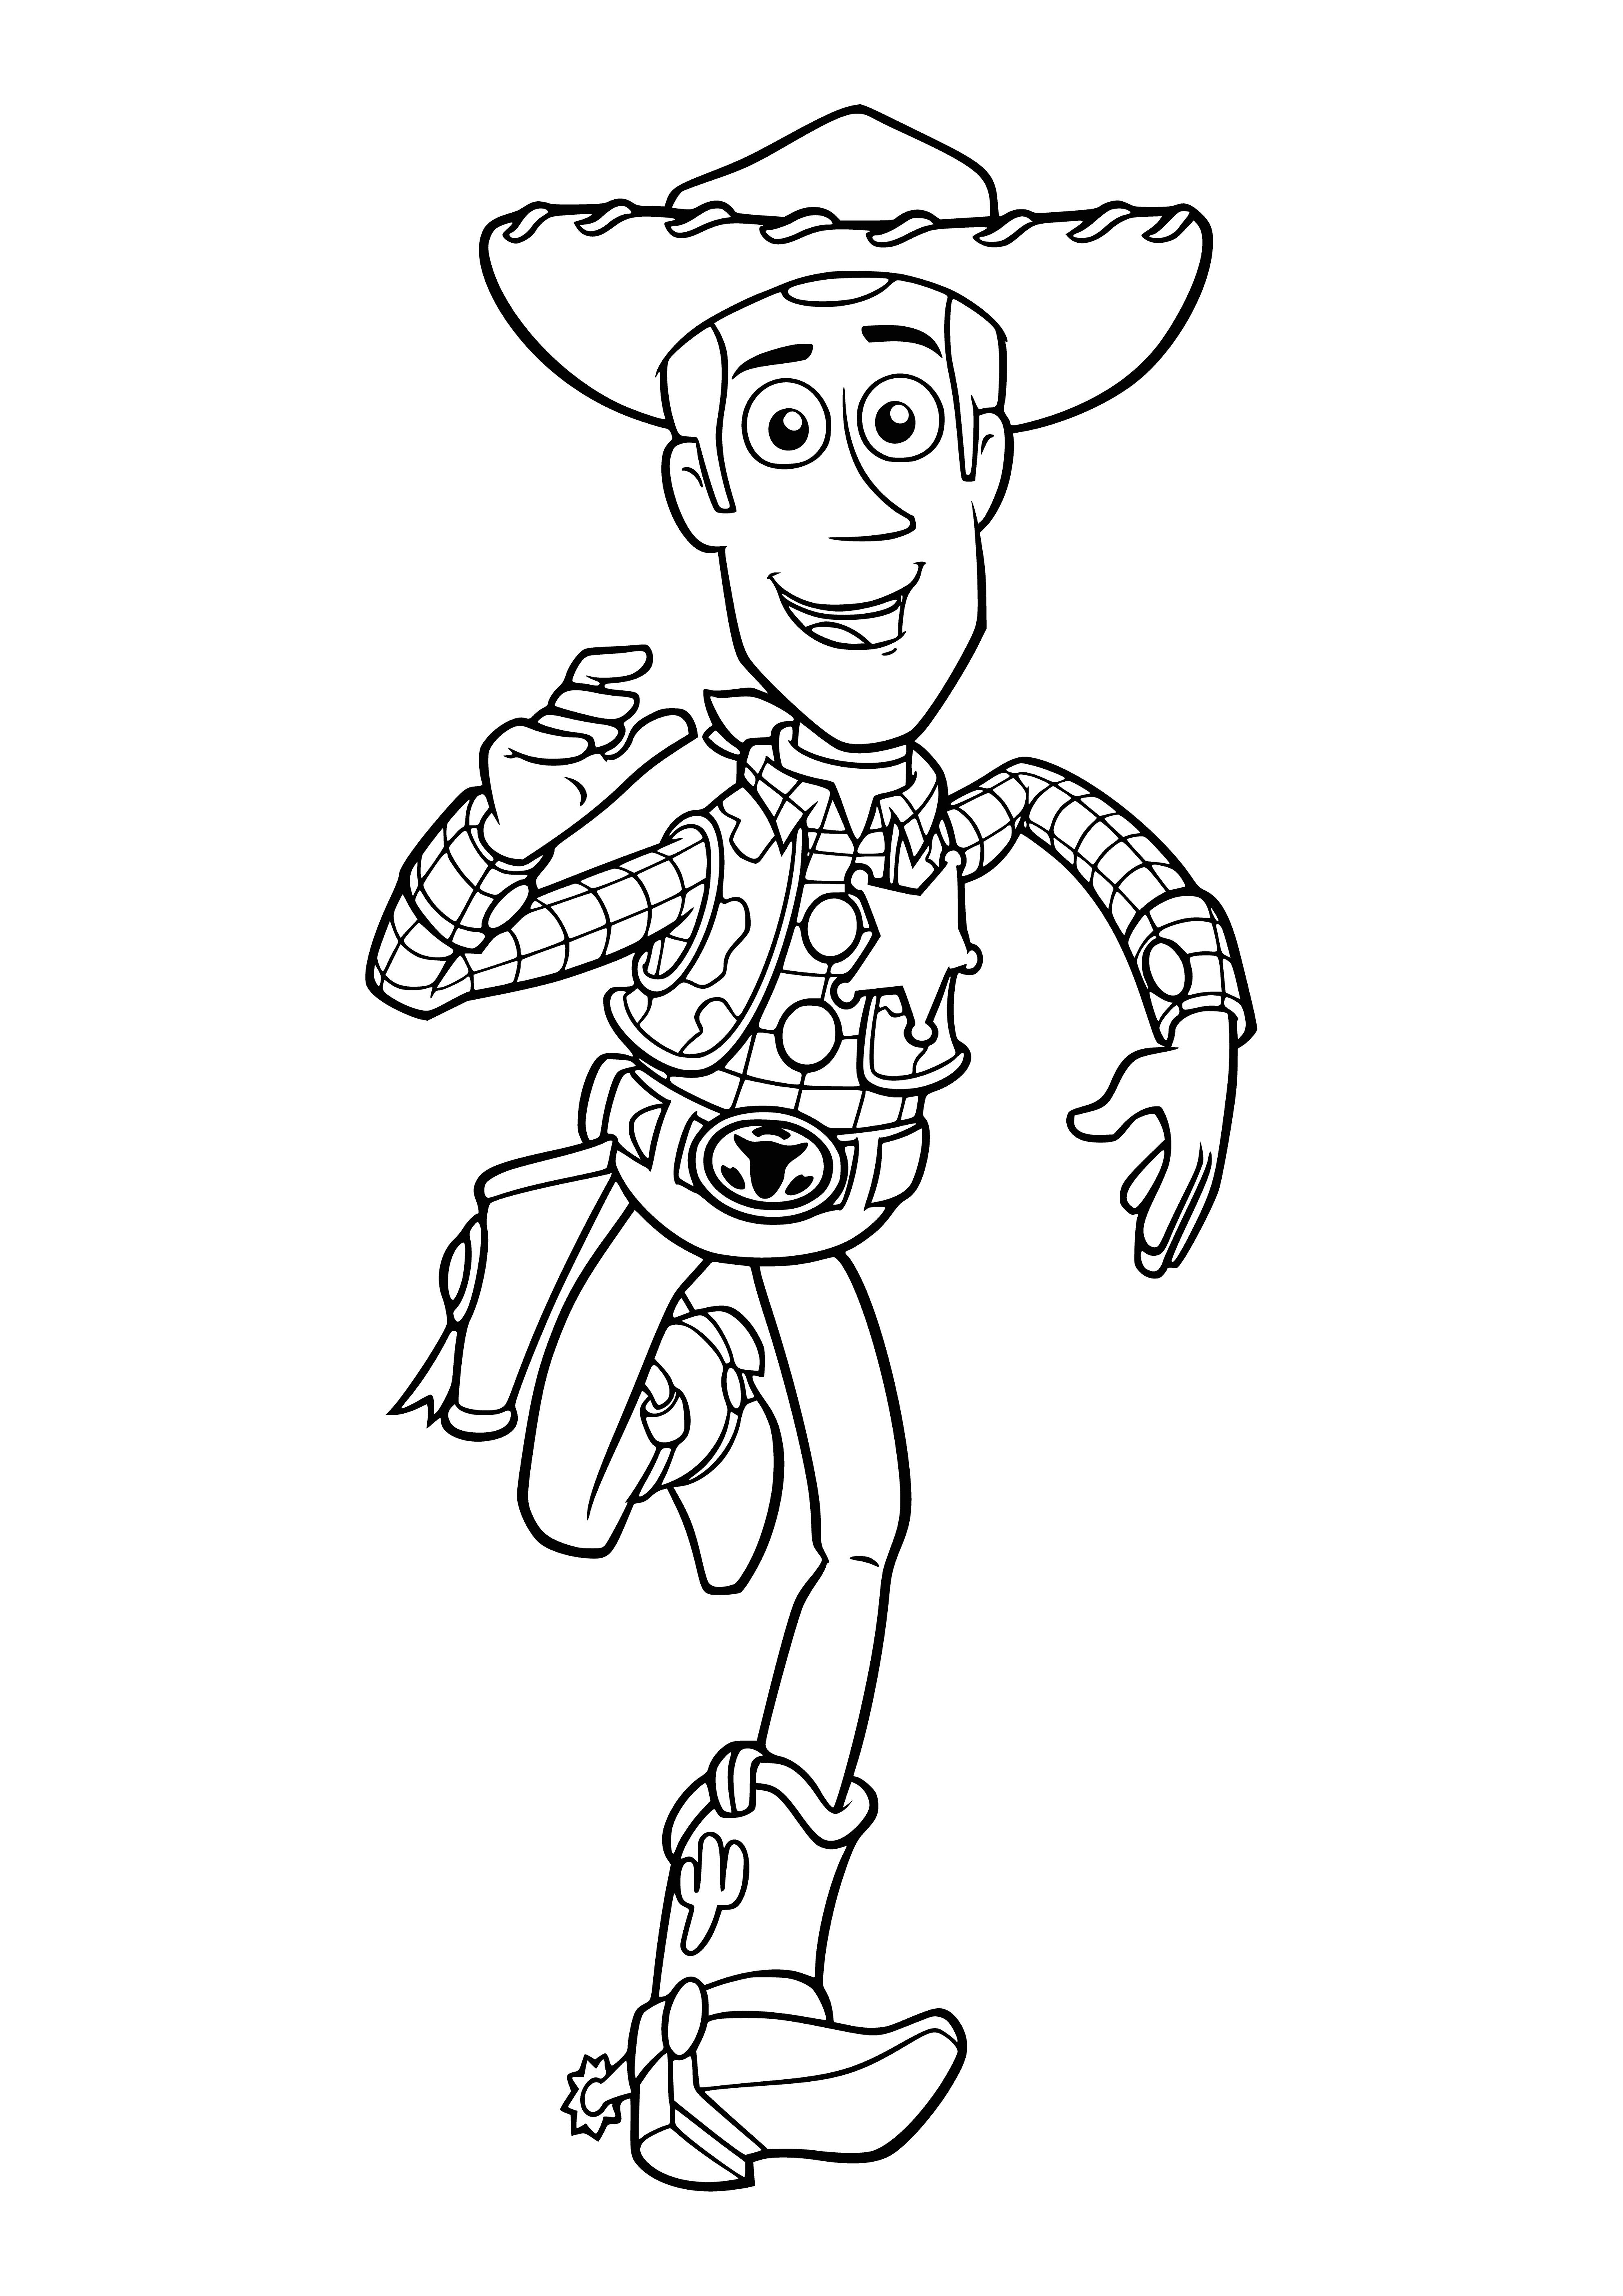 Cowboy woody coloring page